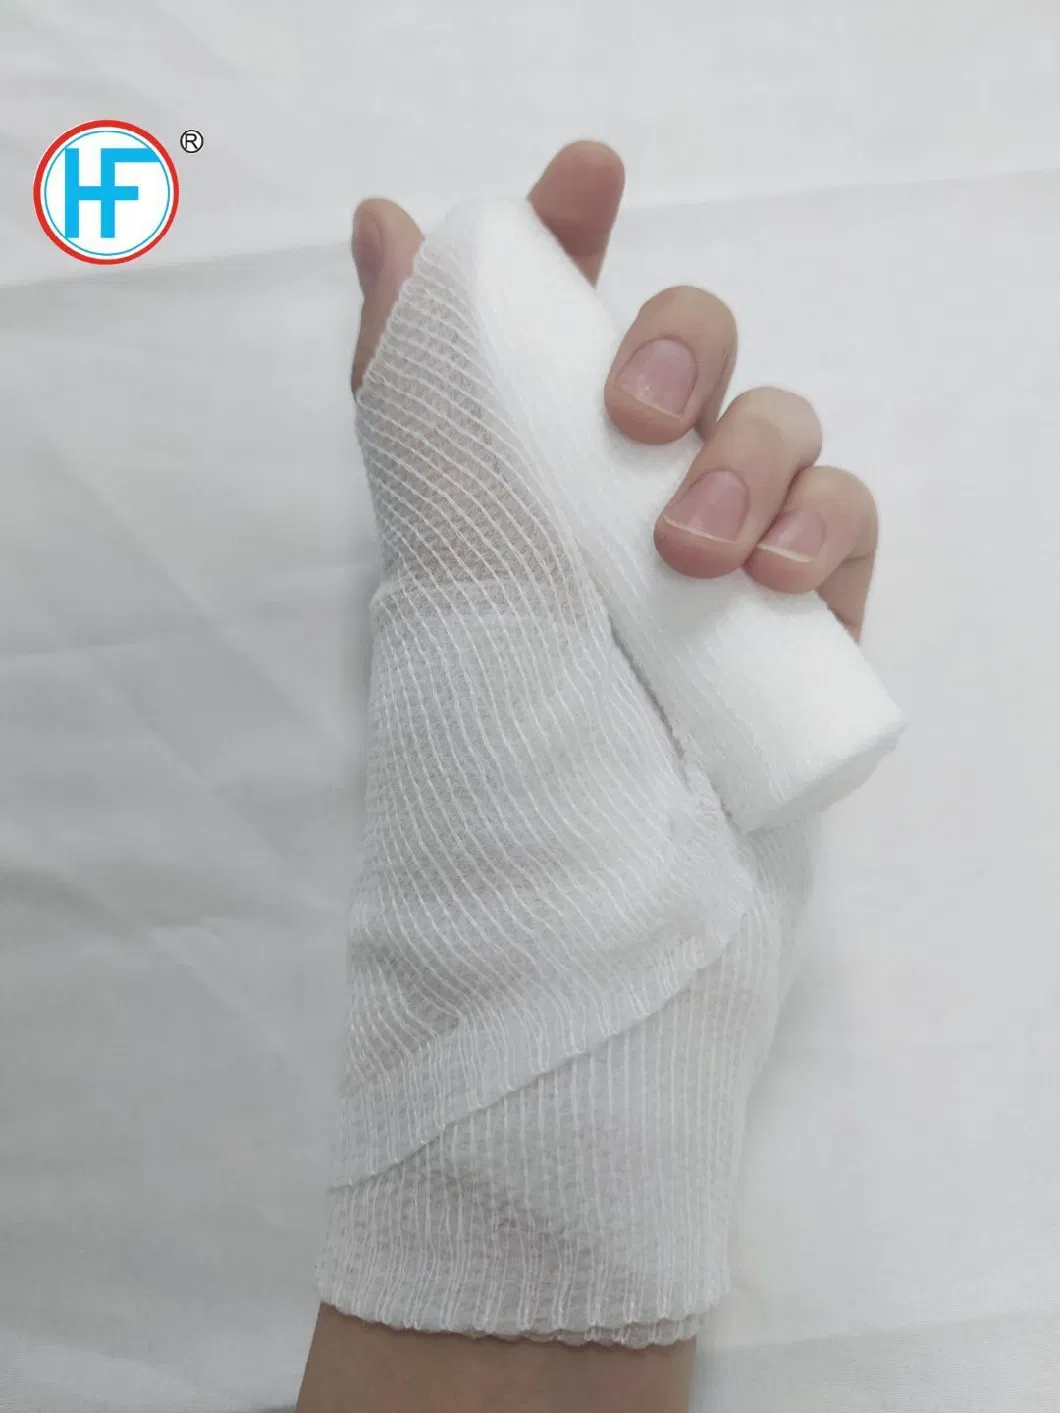 Mdr CE Hf C-1 Factory Direct Selling Good Air Permeability No Irritation First Aid PBT Bandage